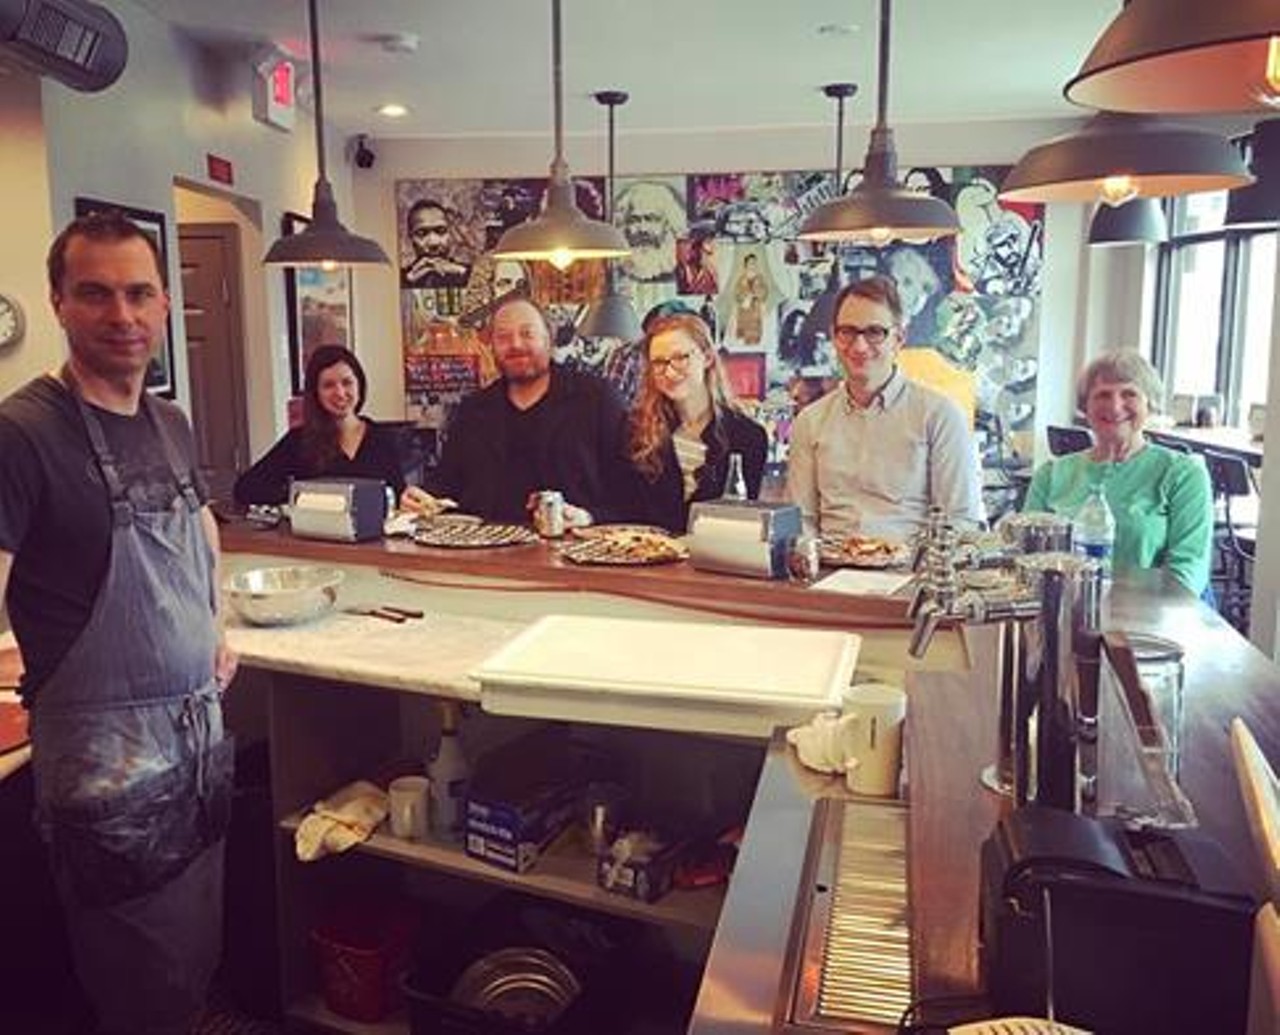 Citizen Pie 
15710 Waterloo Rd., (216) 417-2742 
Set to expand to another location later this year, Citizen Pie&#146;s scratch-made dough and delicious sauce continue to bring people into its original tiny Waterloo spot.
Photo via citizen.pie/Instagram